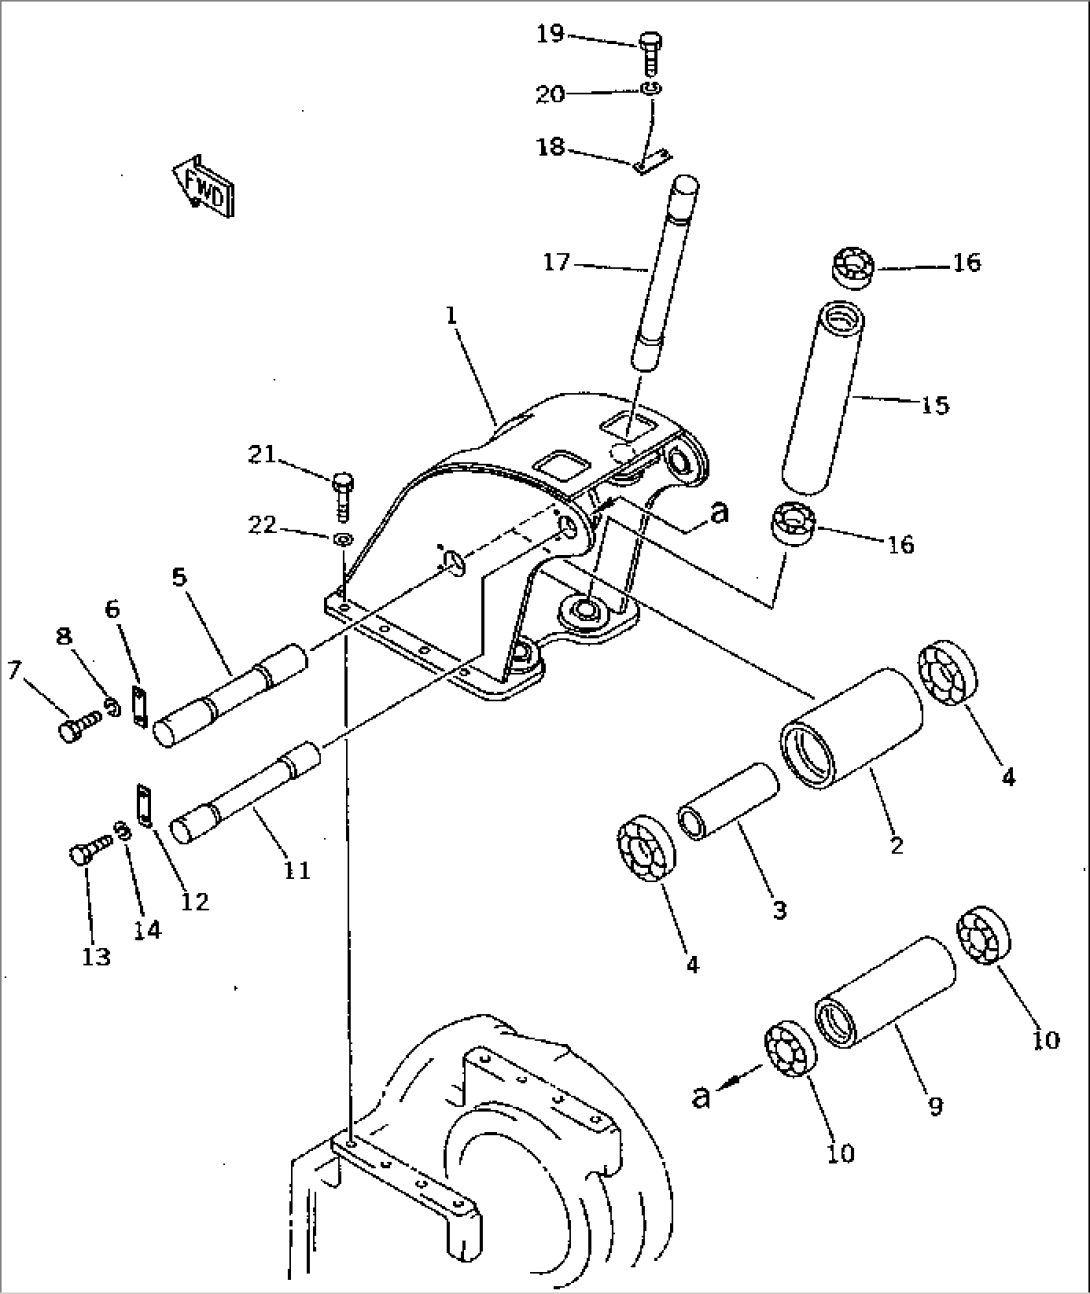 LOGGING ARM (FOR TOWING WINCH)